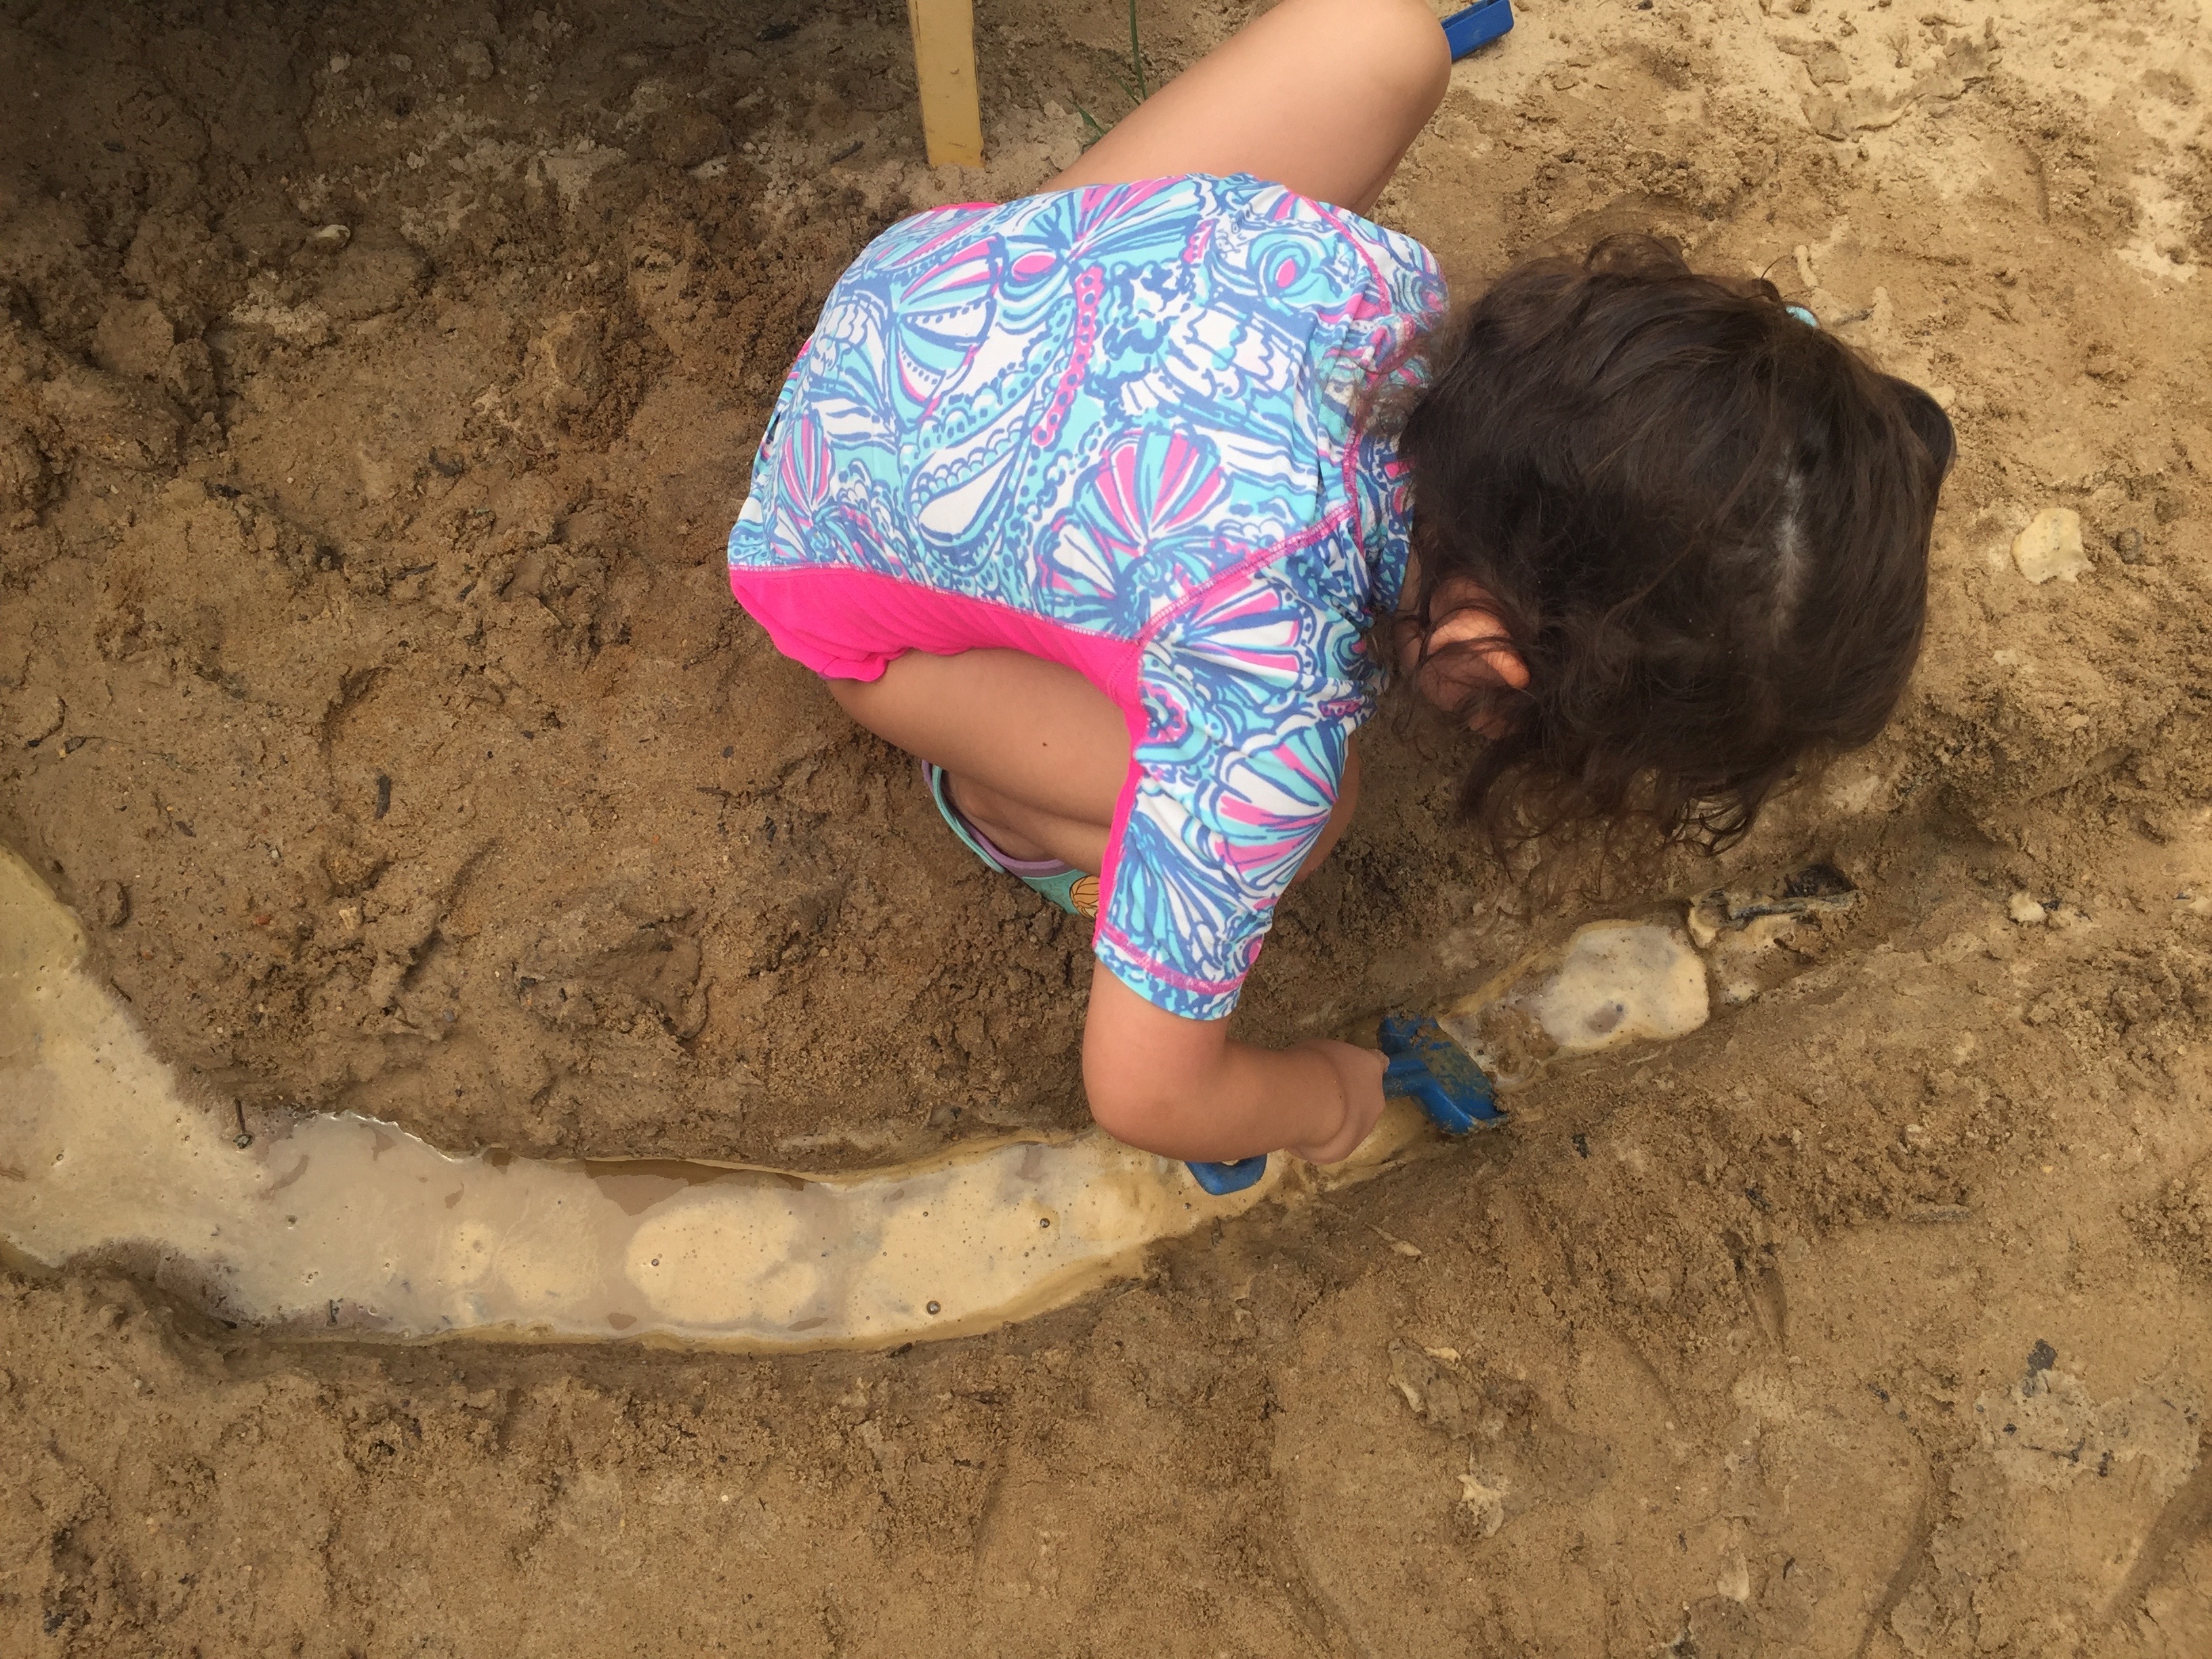 Child digging a channel for water in the sand.